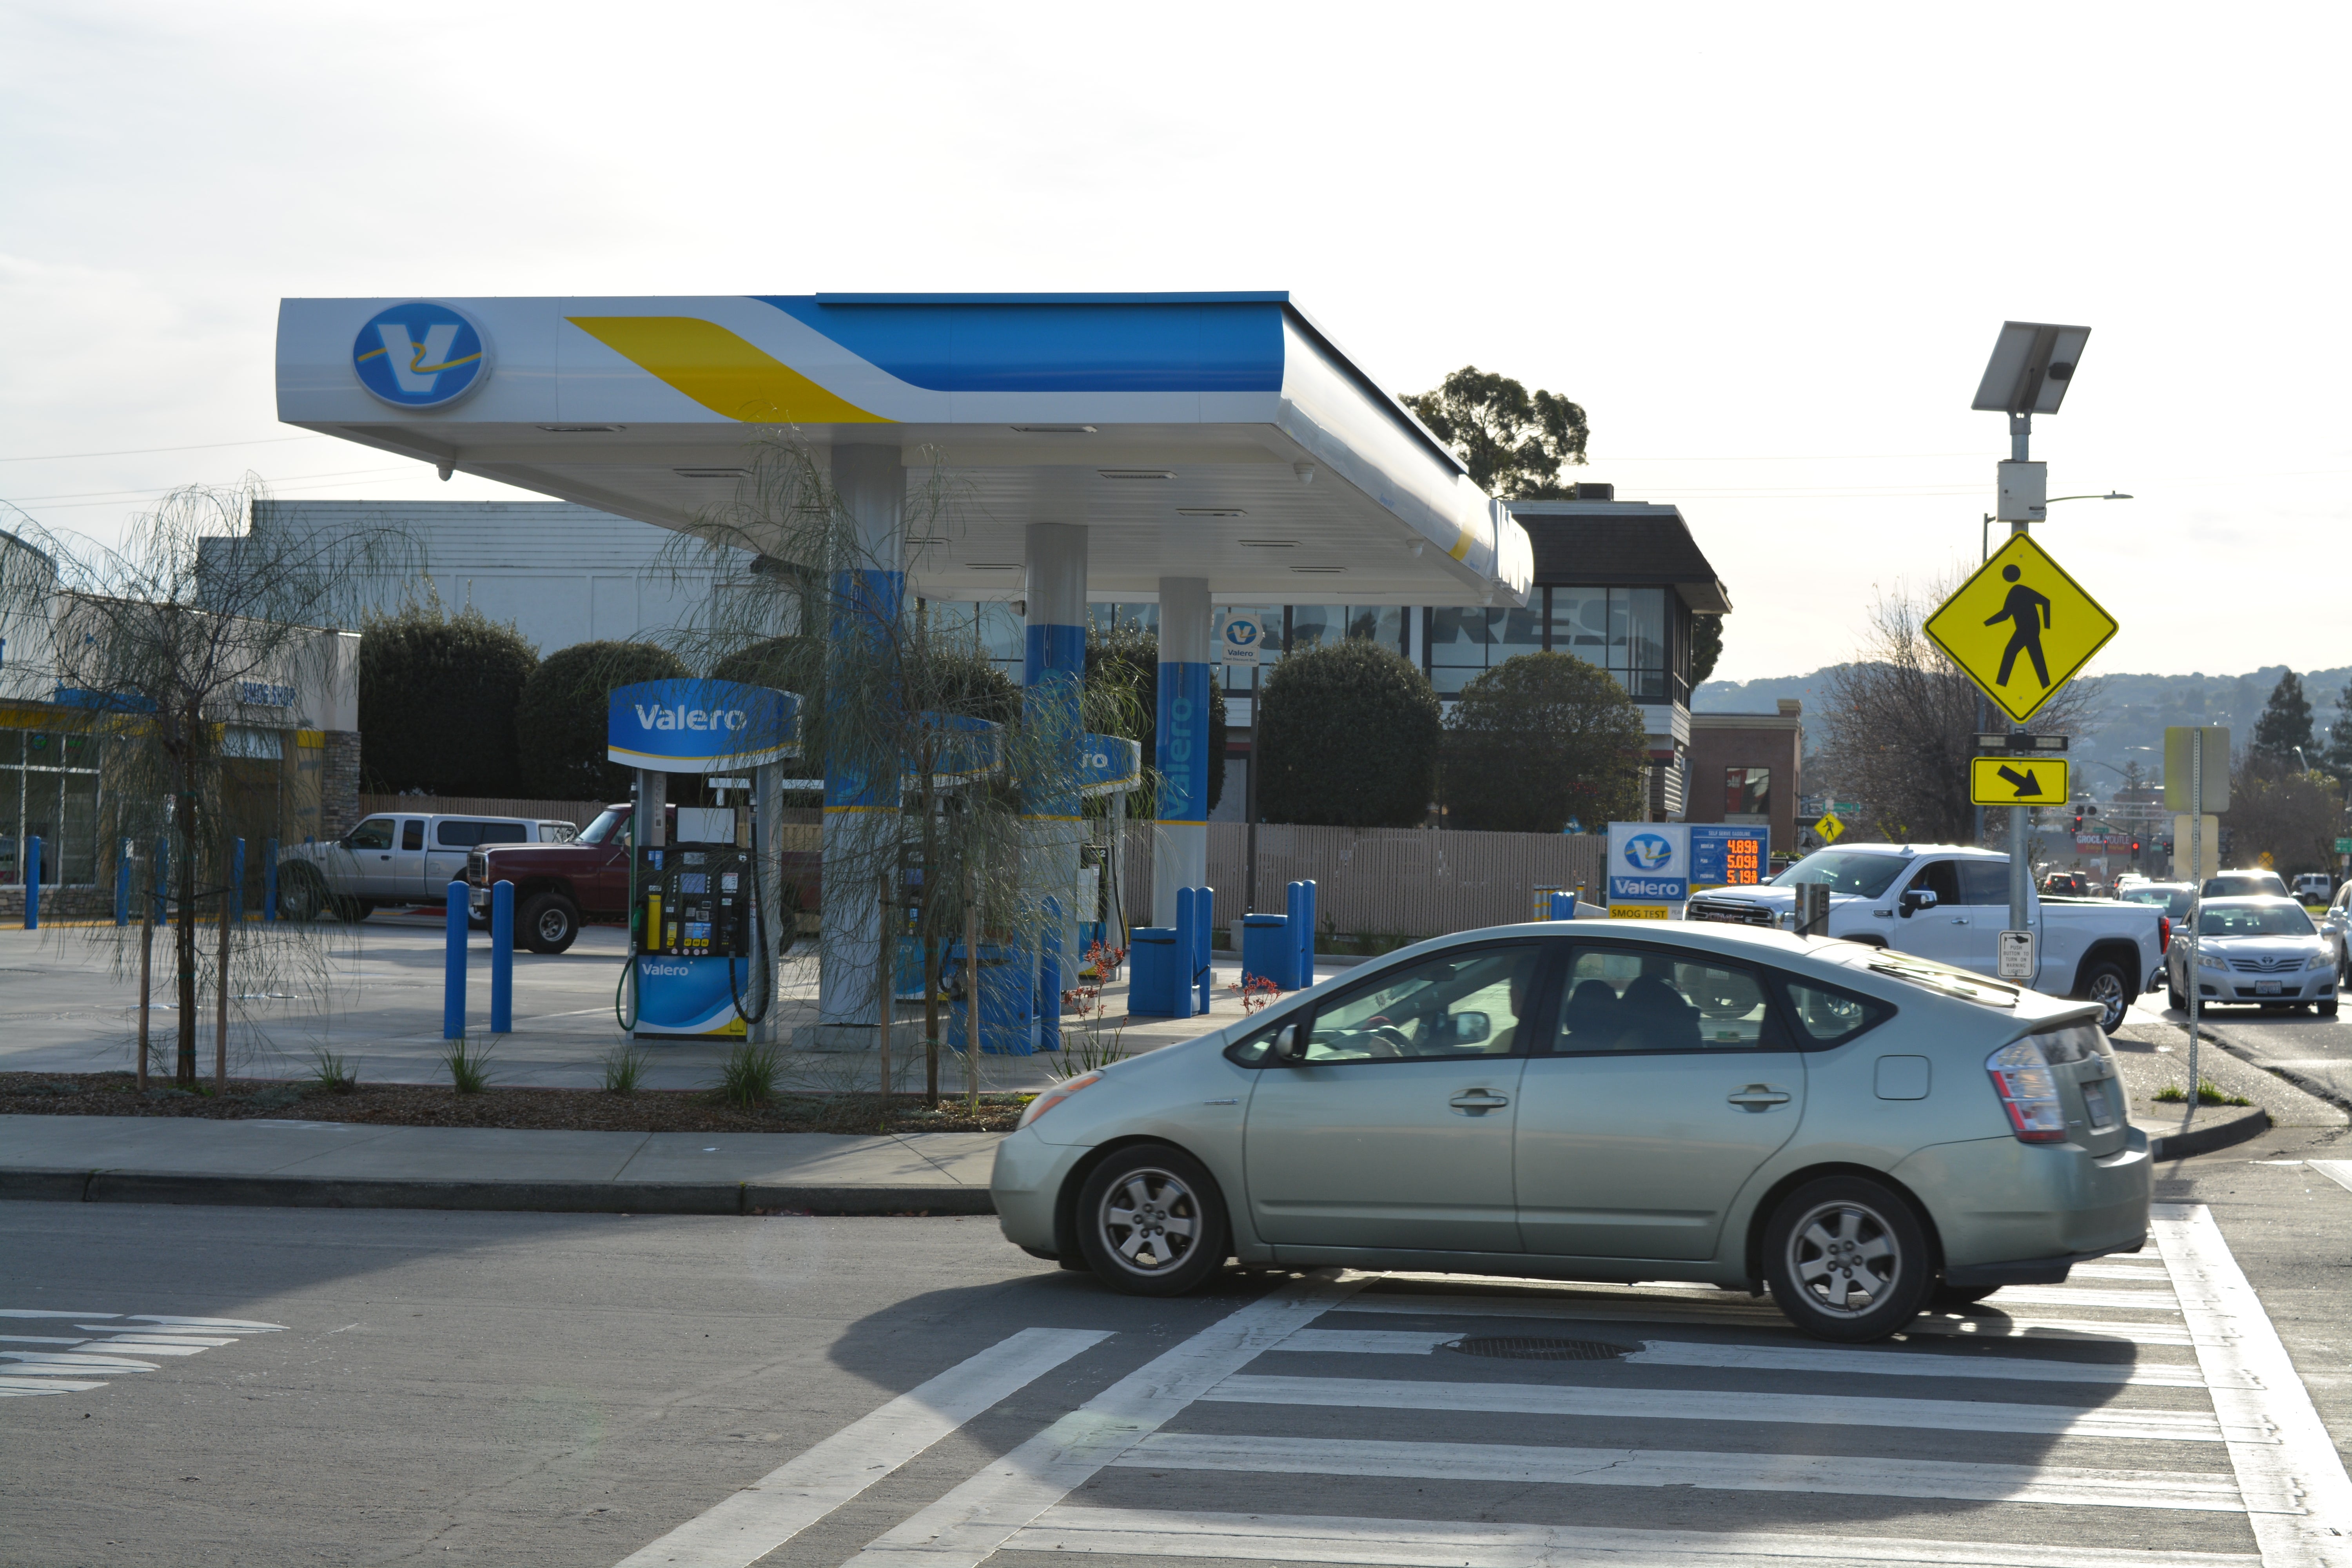 Cars drive past a gas station in Petaluma, California, on 11 January, 2021. The city is the first in the nation to outlaw construction of new gas stations.